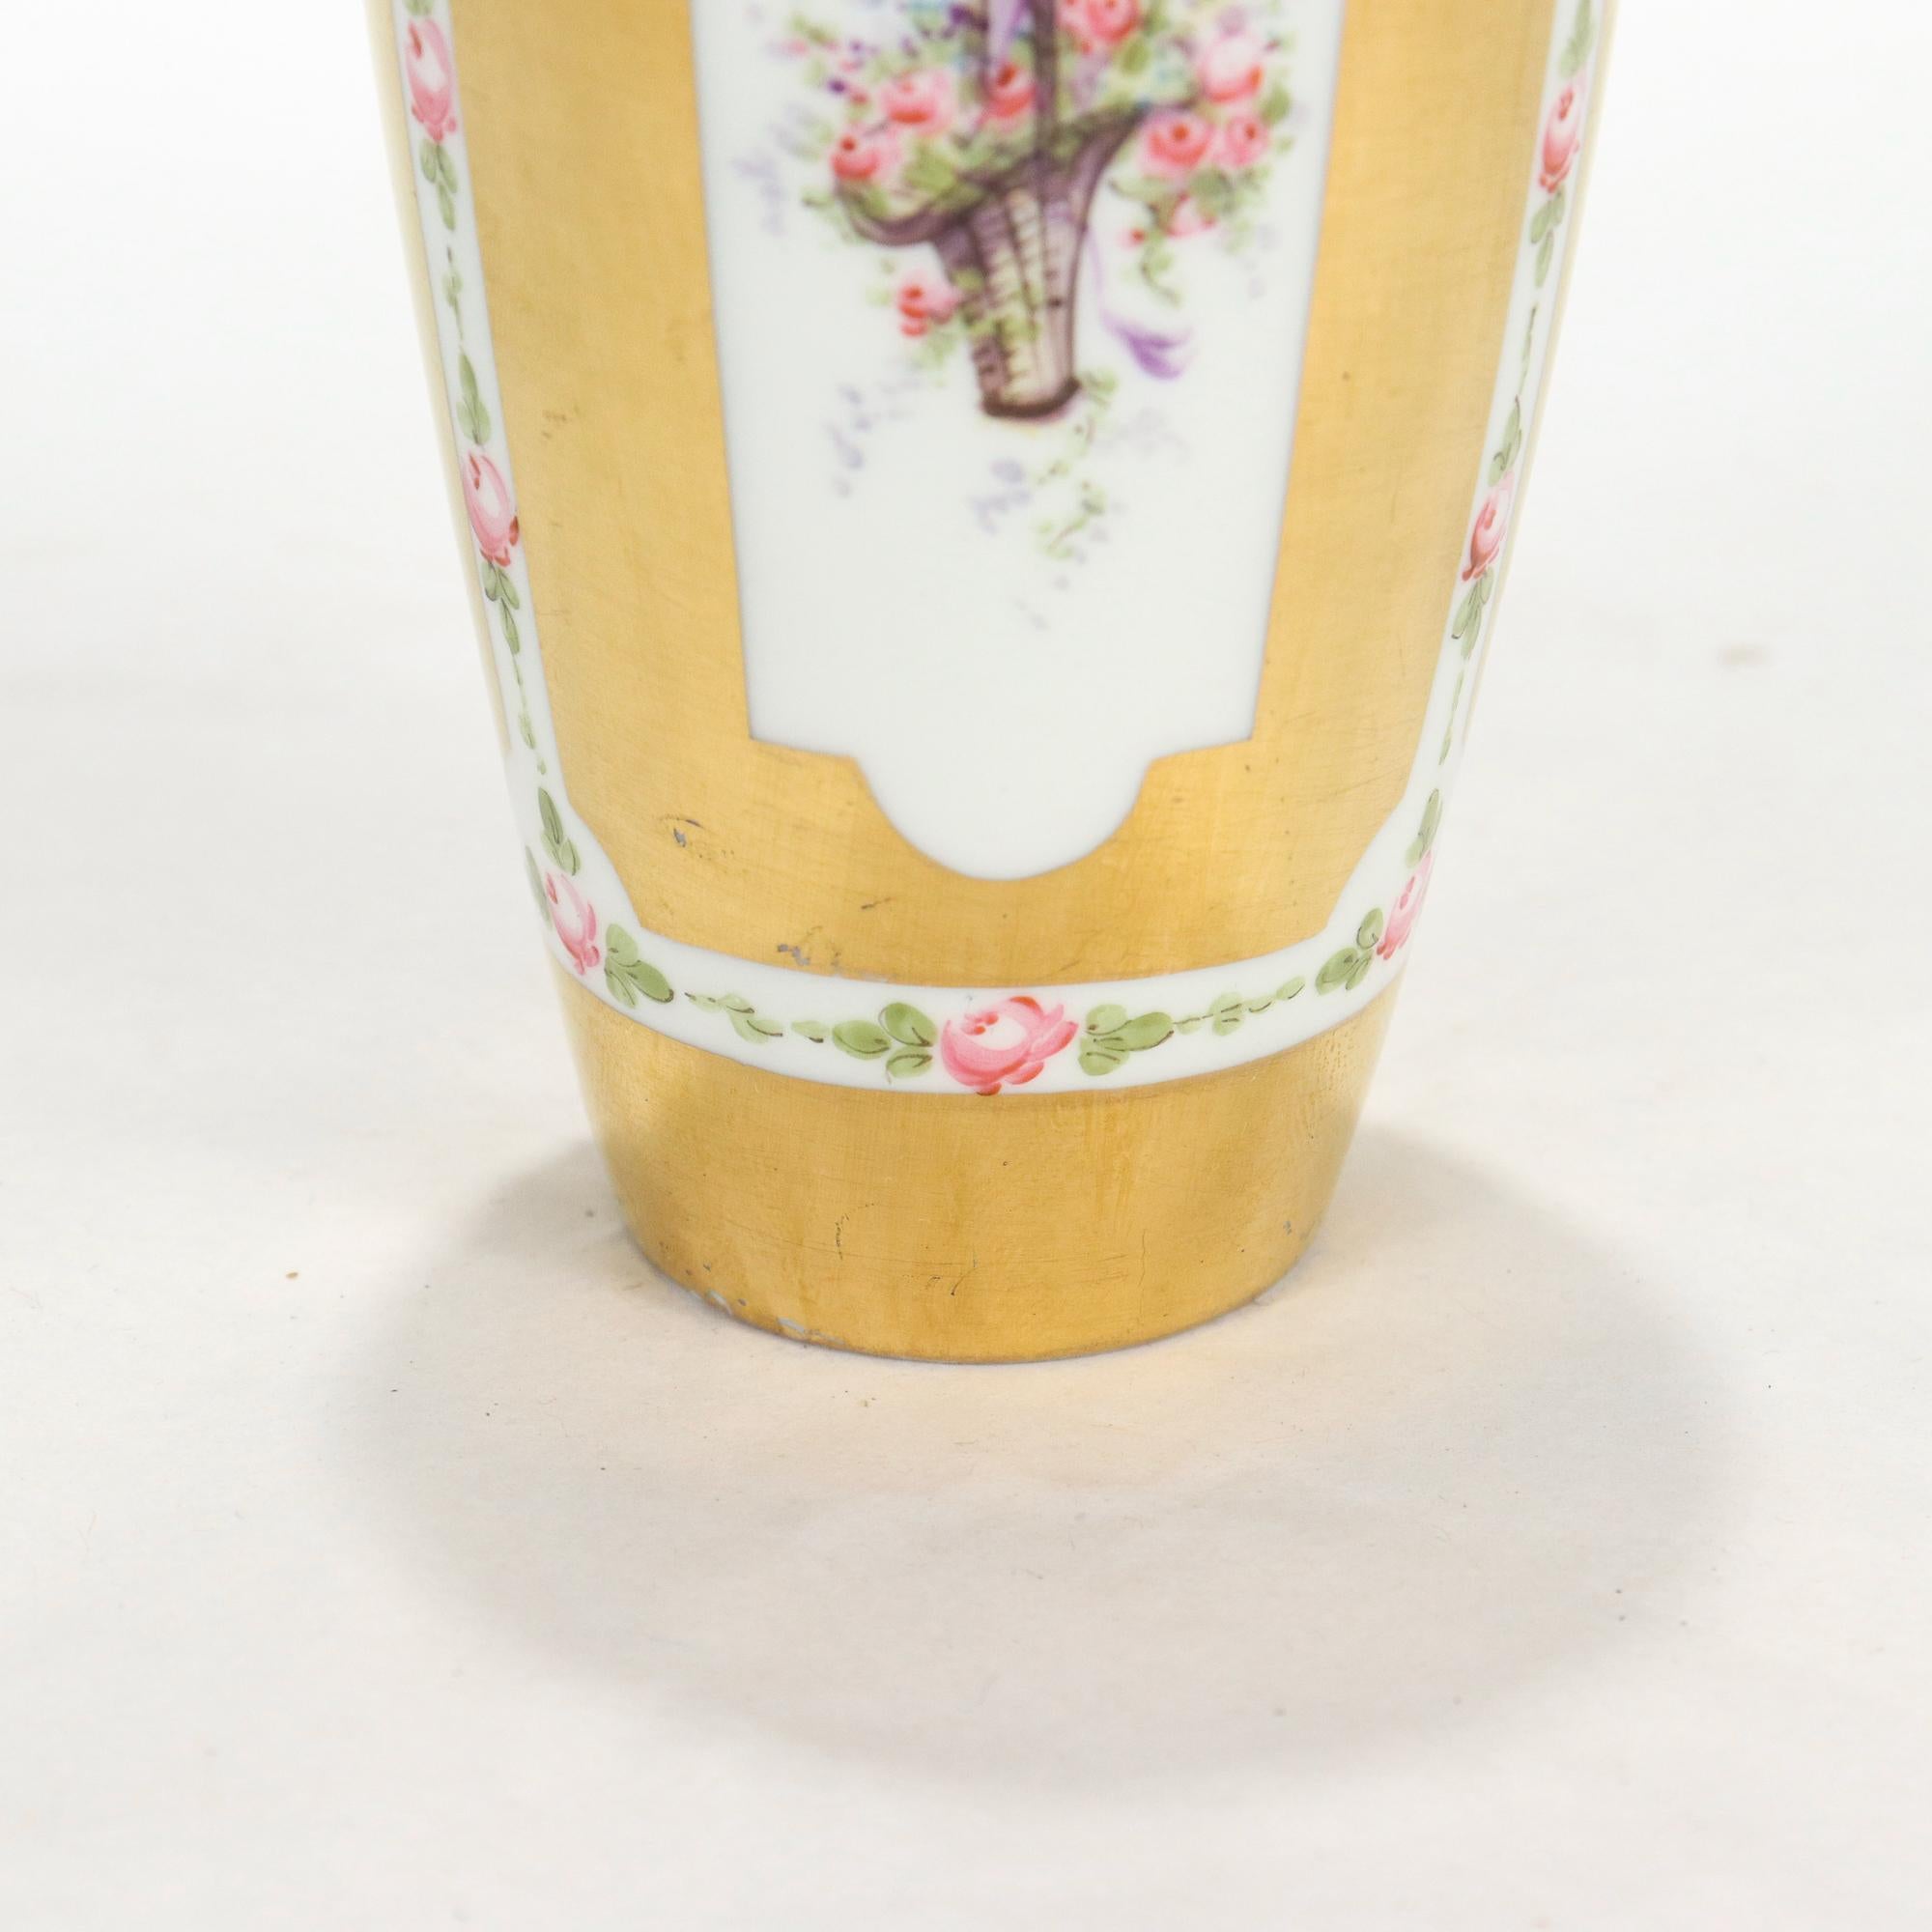 Old Sevres Type Gilt Porcelain Vase with Hand Painted Flower Baskets & Ribbons For Sale 4